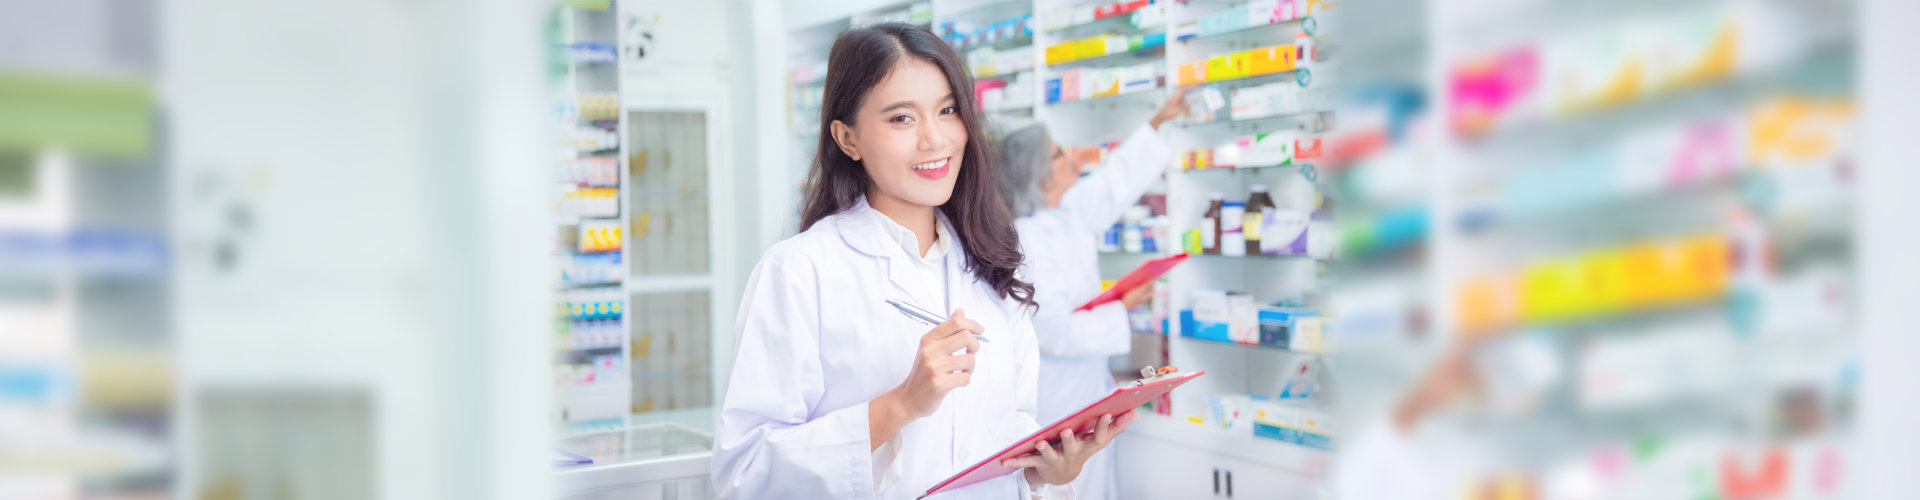 Beautiful pharmacist holding chart and smiles in drugstore